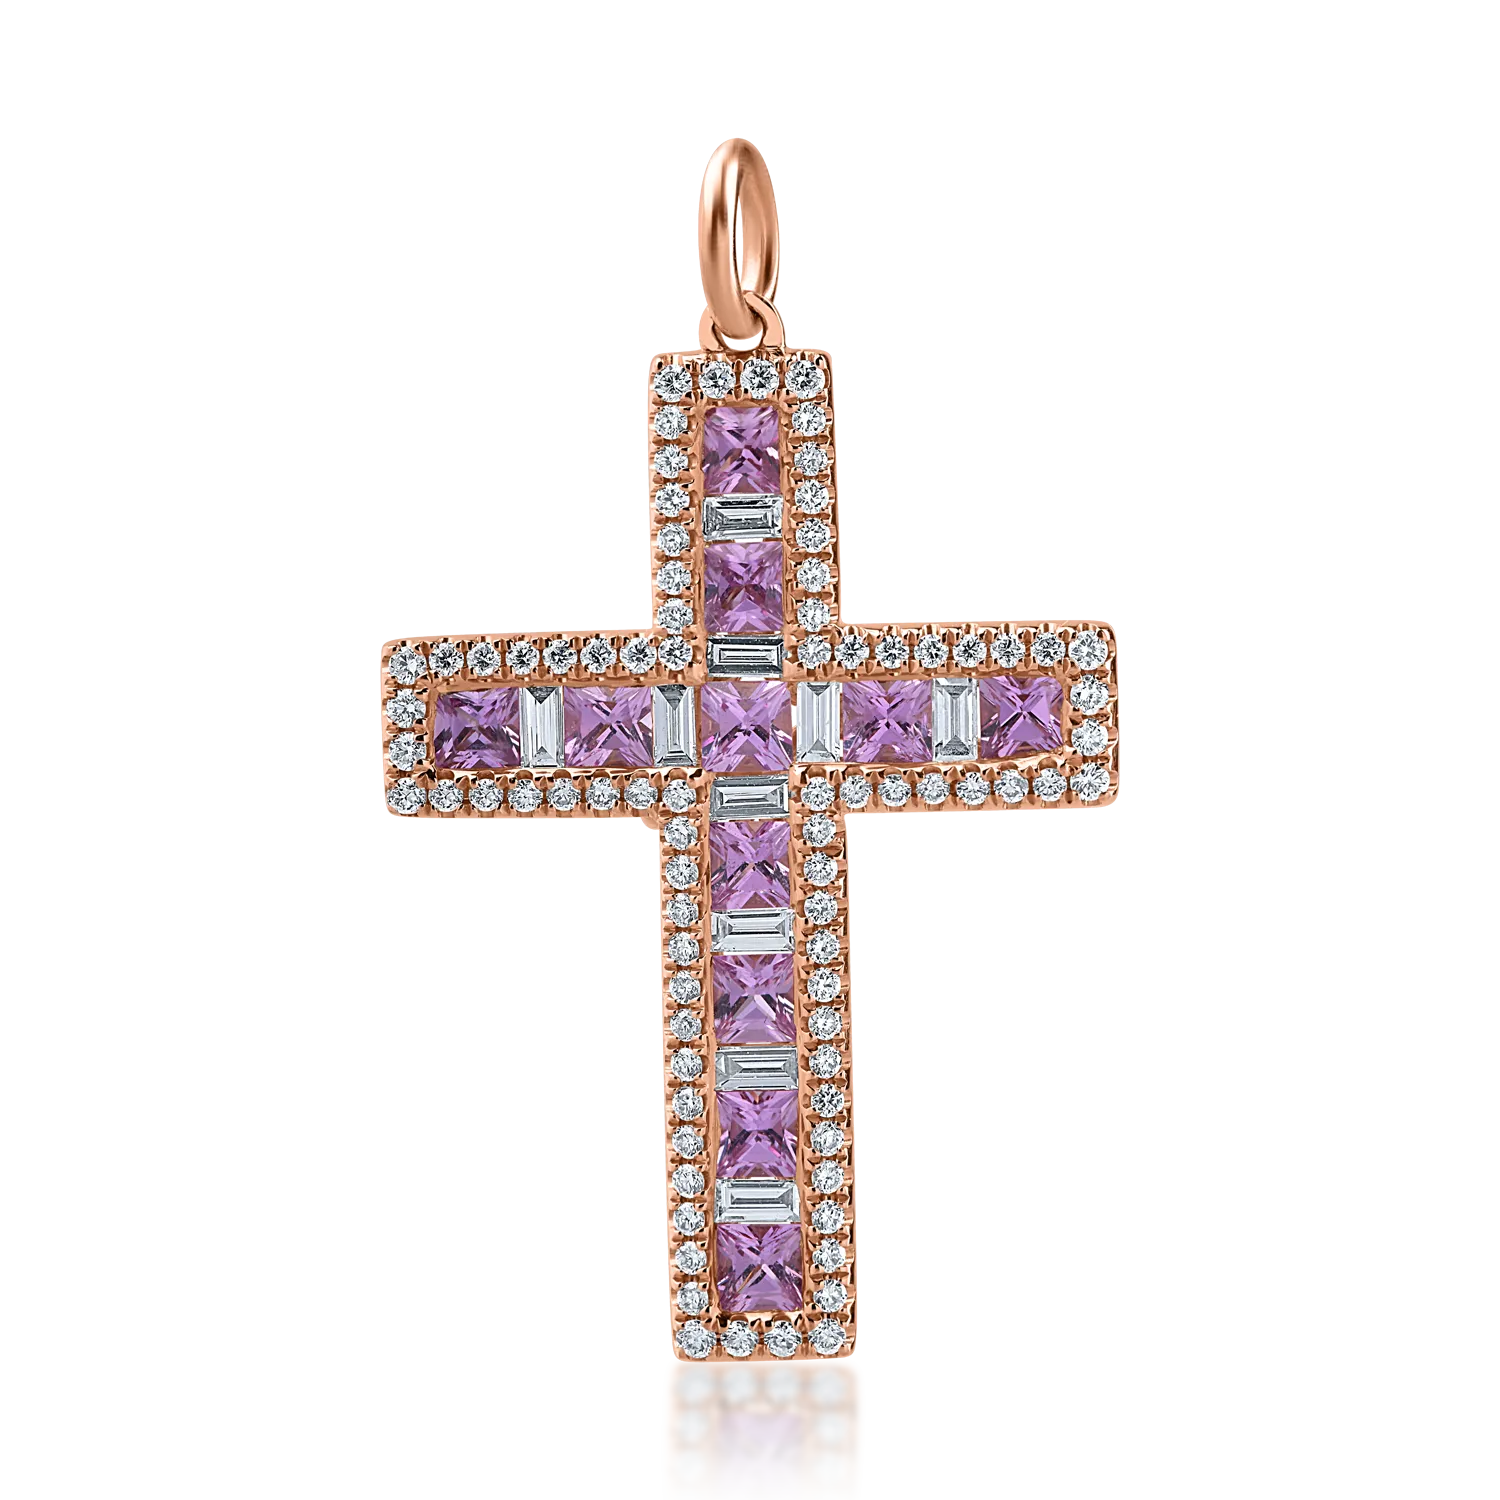 Rose gold cross pendant with 0.96ct rubies and 0.51ct diamonds